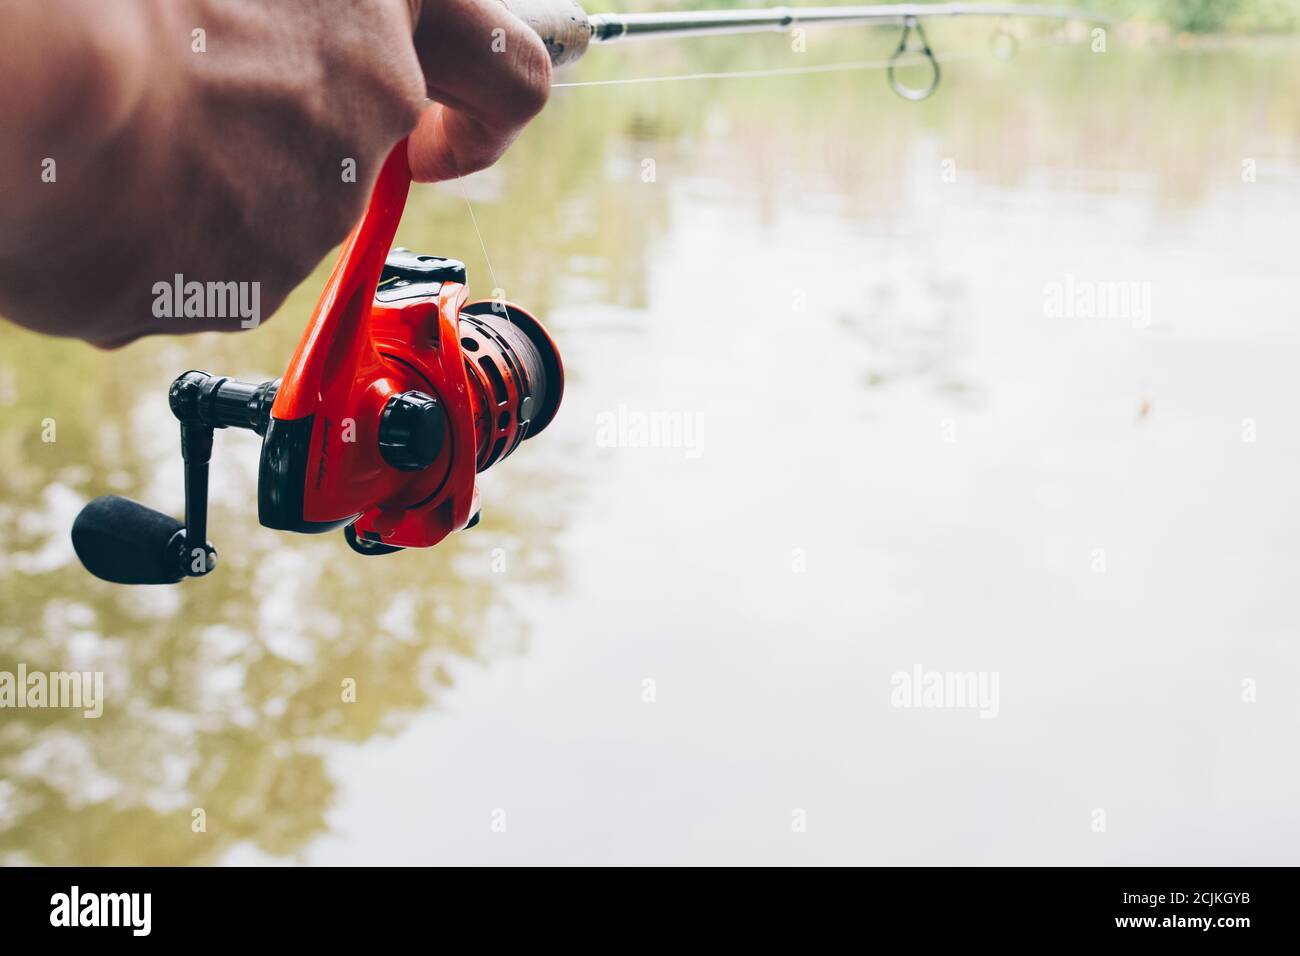 https://c8.alamy.com/comp/2CJKGYB/close-up-of-spinning-with-the-fishing-reel-in-the-hand-fishing-hook-on-the-line-with-the-bait-in-the-left-hand-against-the-background-of-the-water-2CJKGYB.jpg